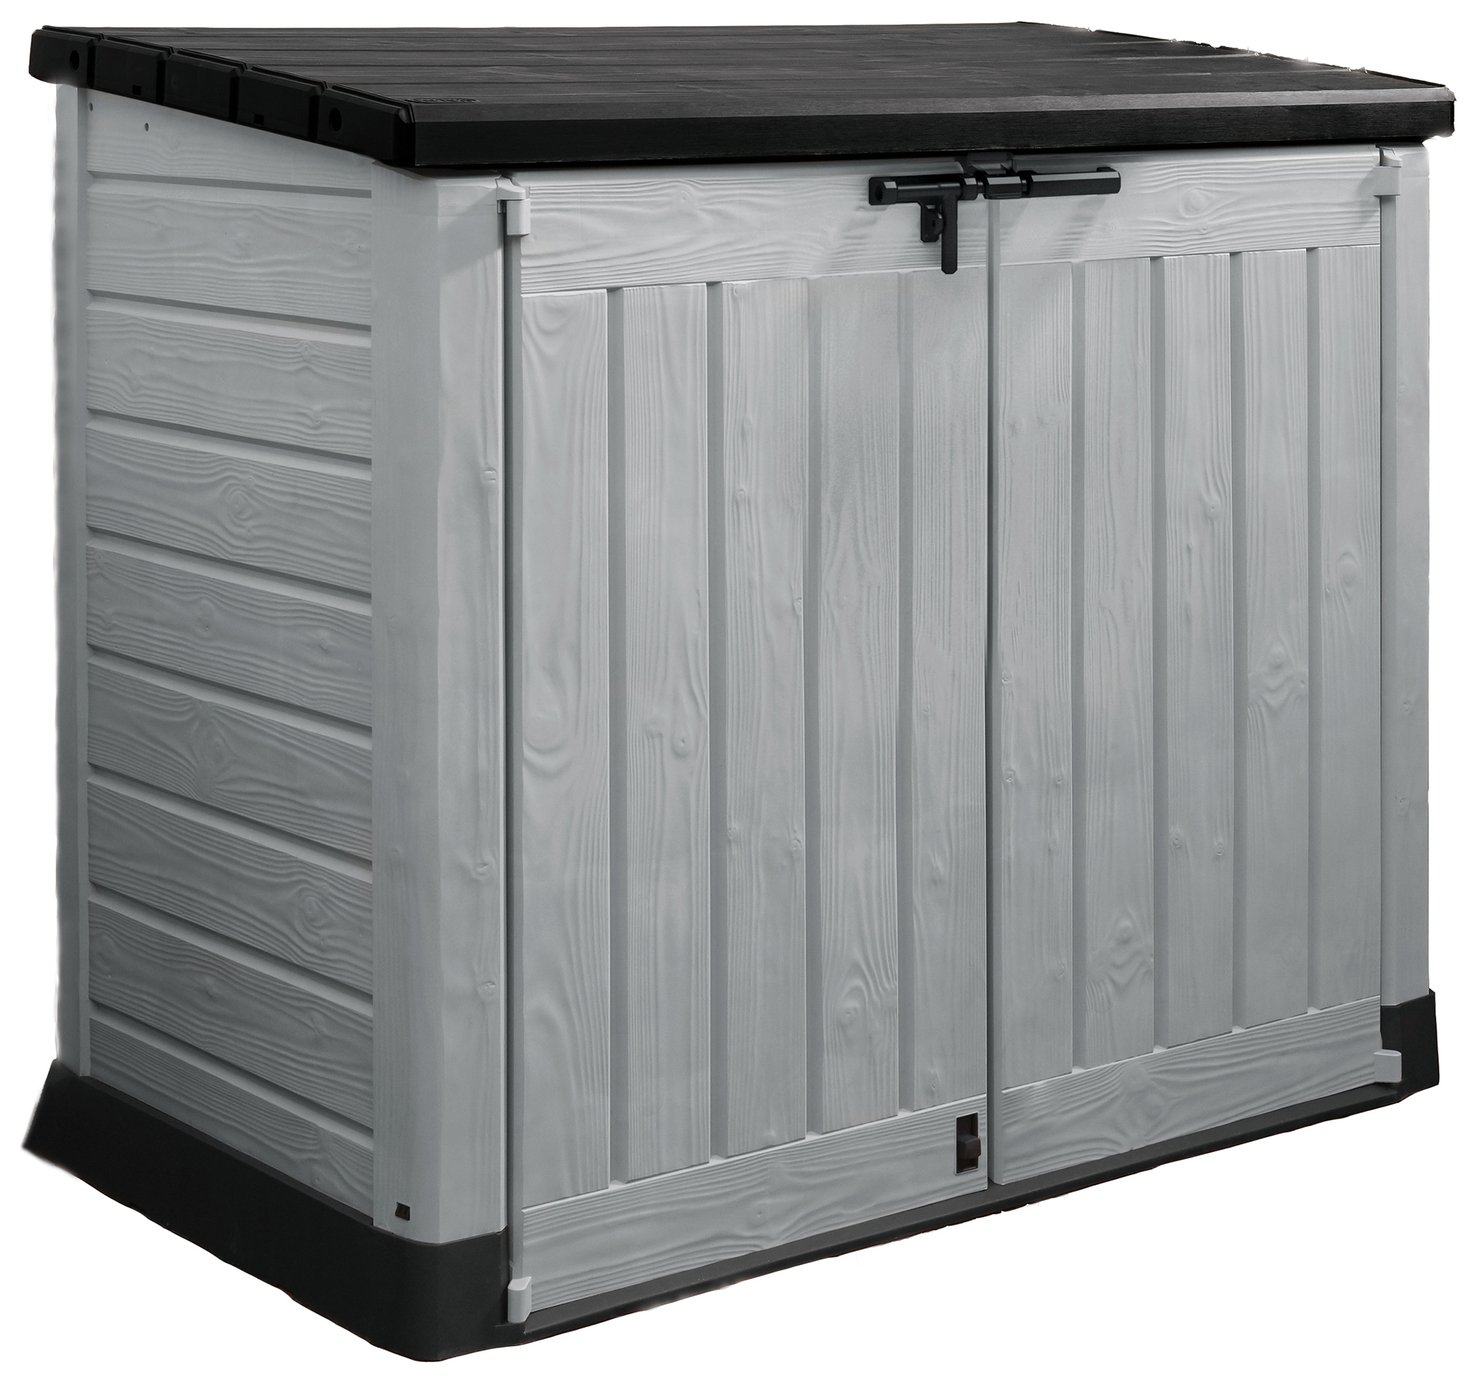 Keter Store It Out Max 1200L Garden Storage Box -Grey/Black